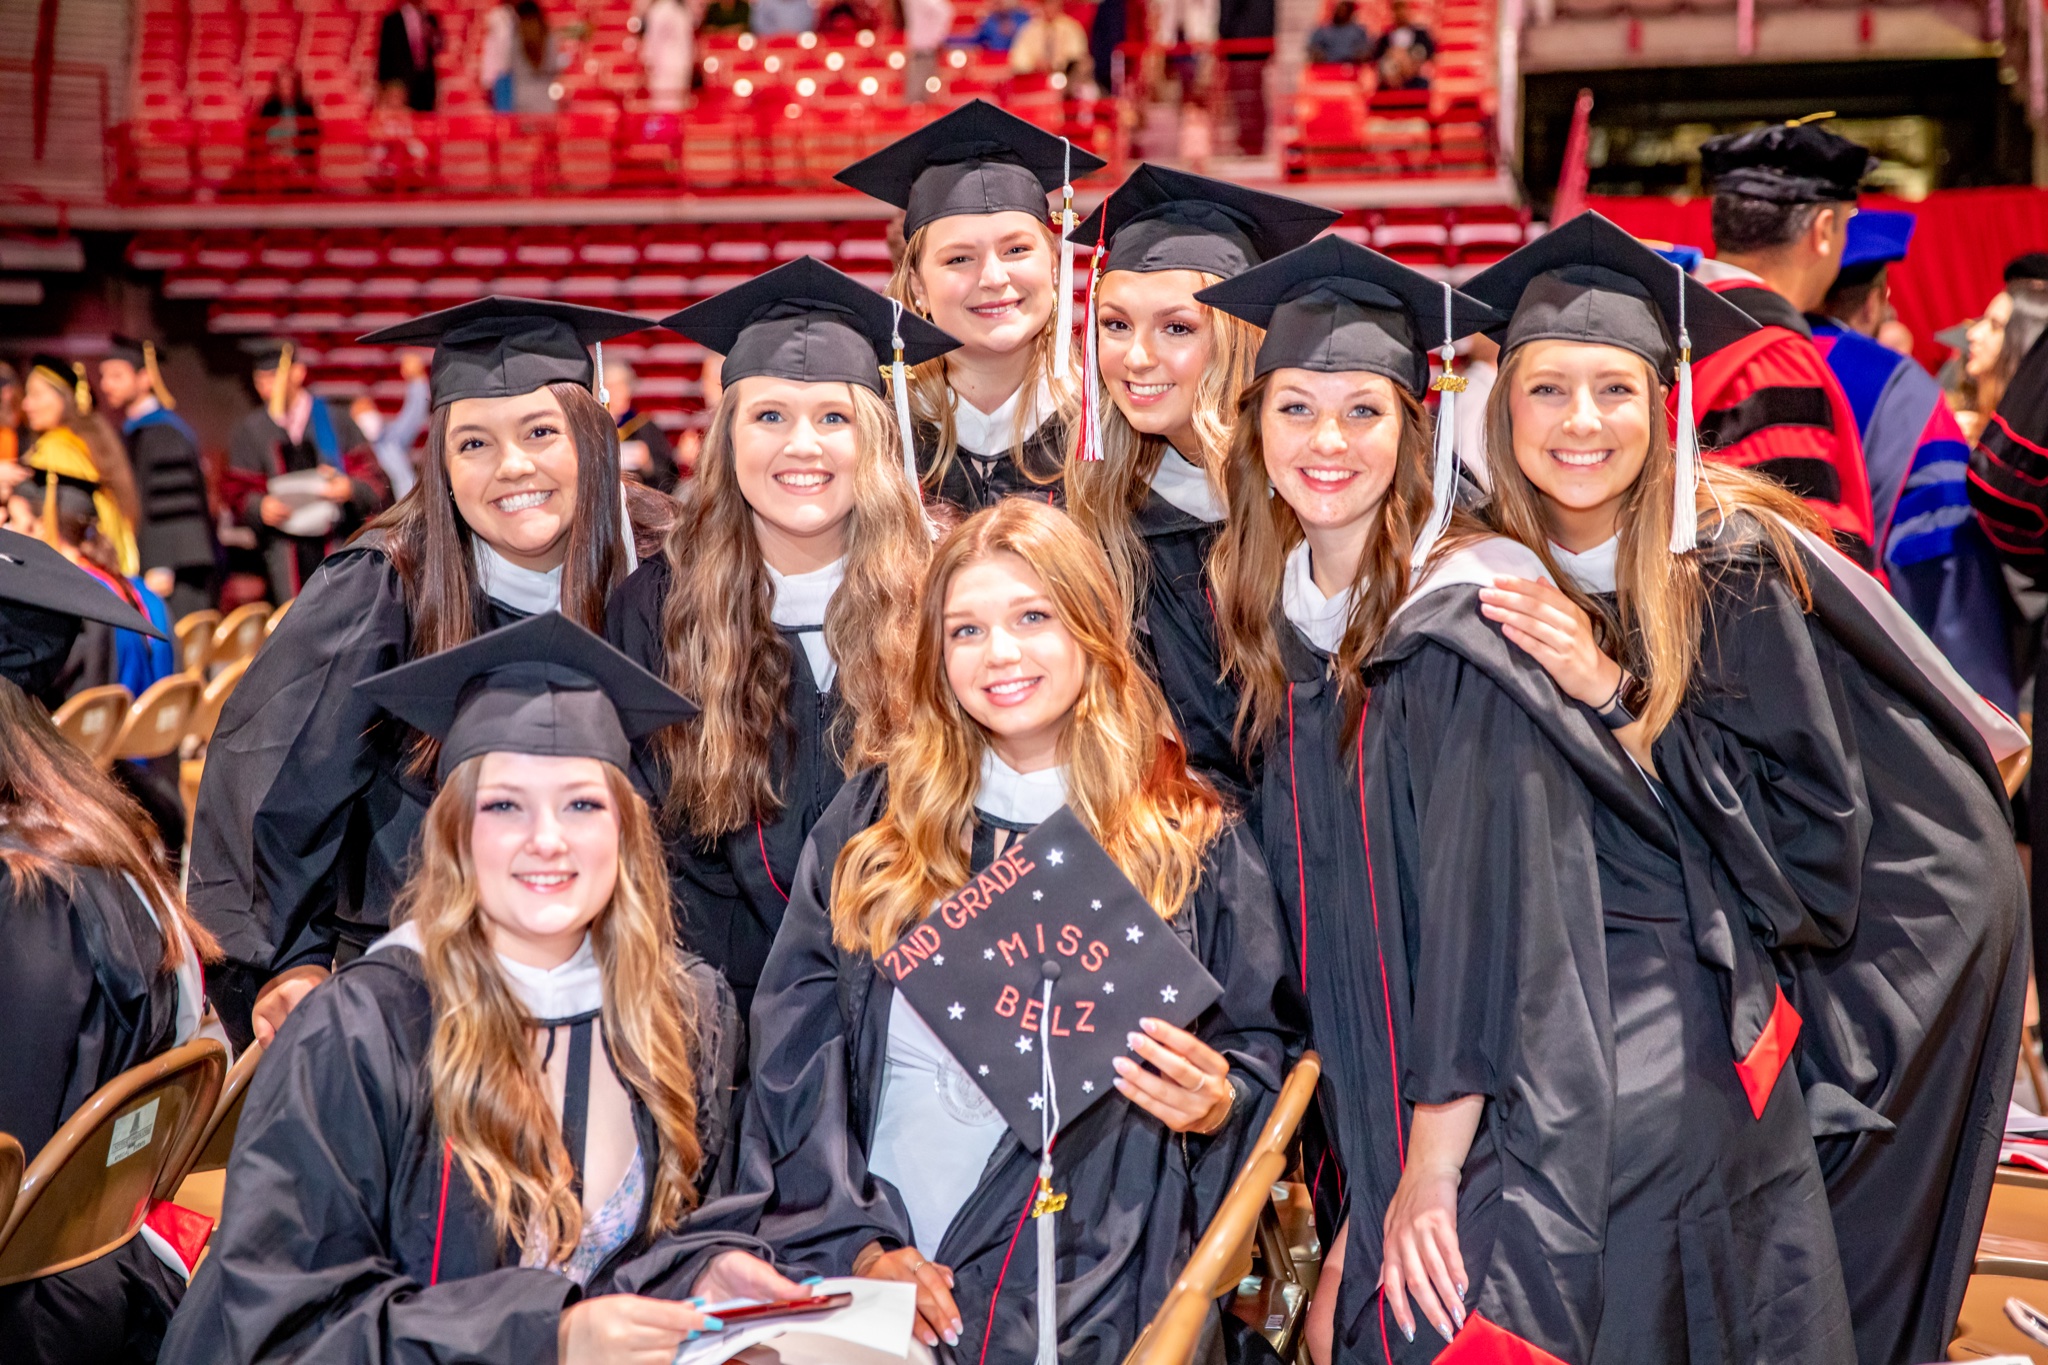 Master of Arts in Teaching graduates, Spring 2022 Commencement, May 14